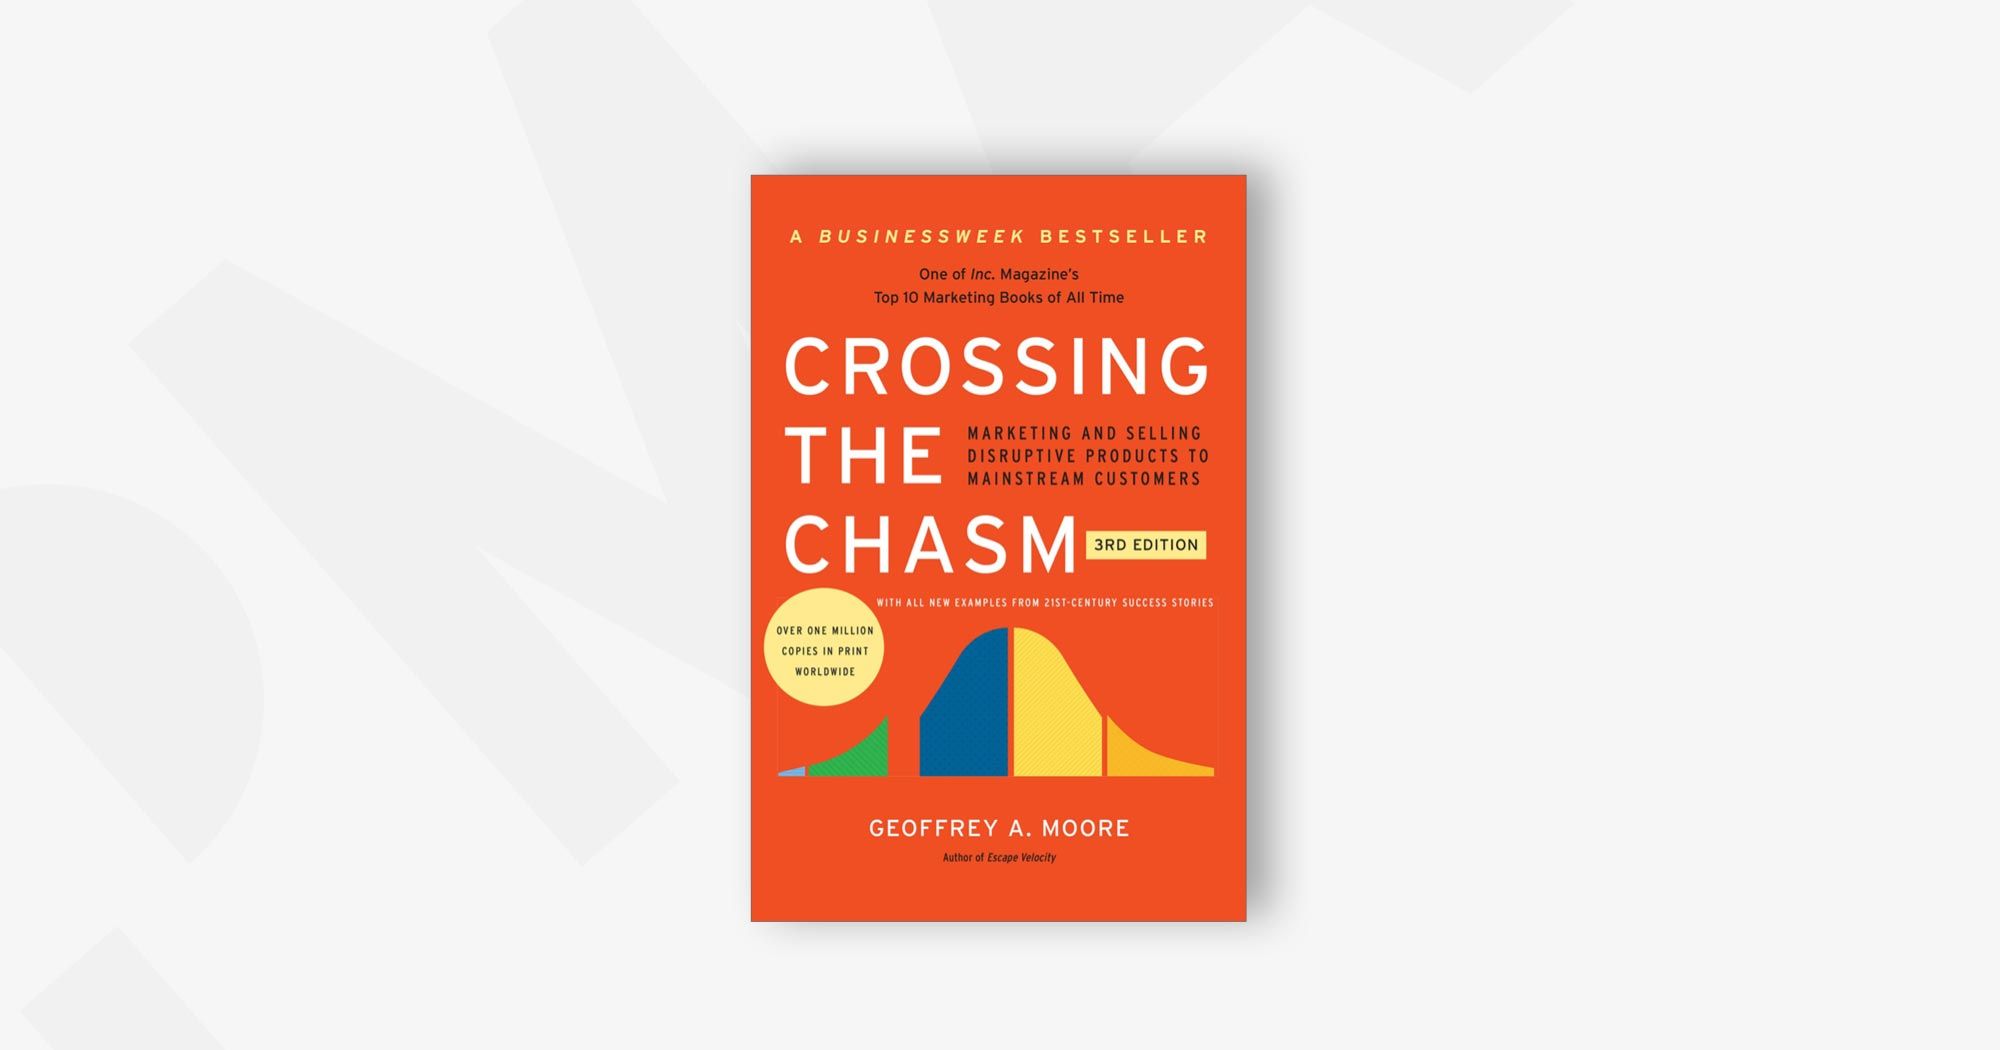 Crossing the Chasm, 3rd Edition: Marketing and Selling Disruptive Products to Mainstream Customers – Geoffrey Moore